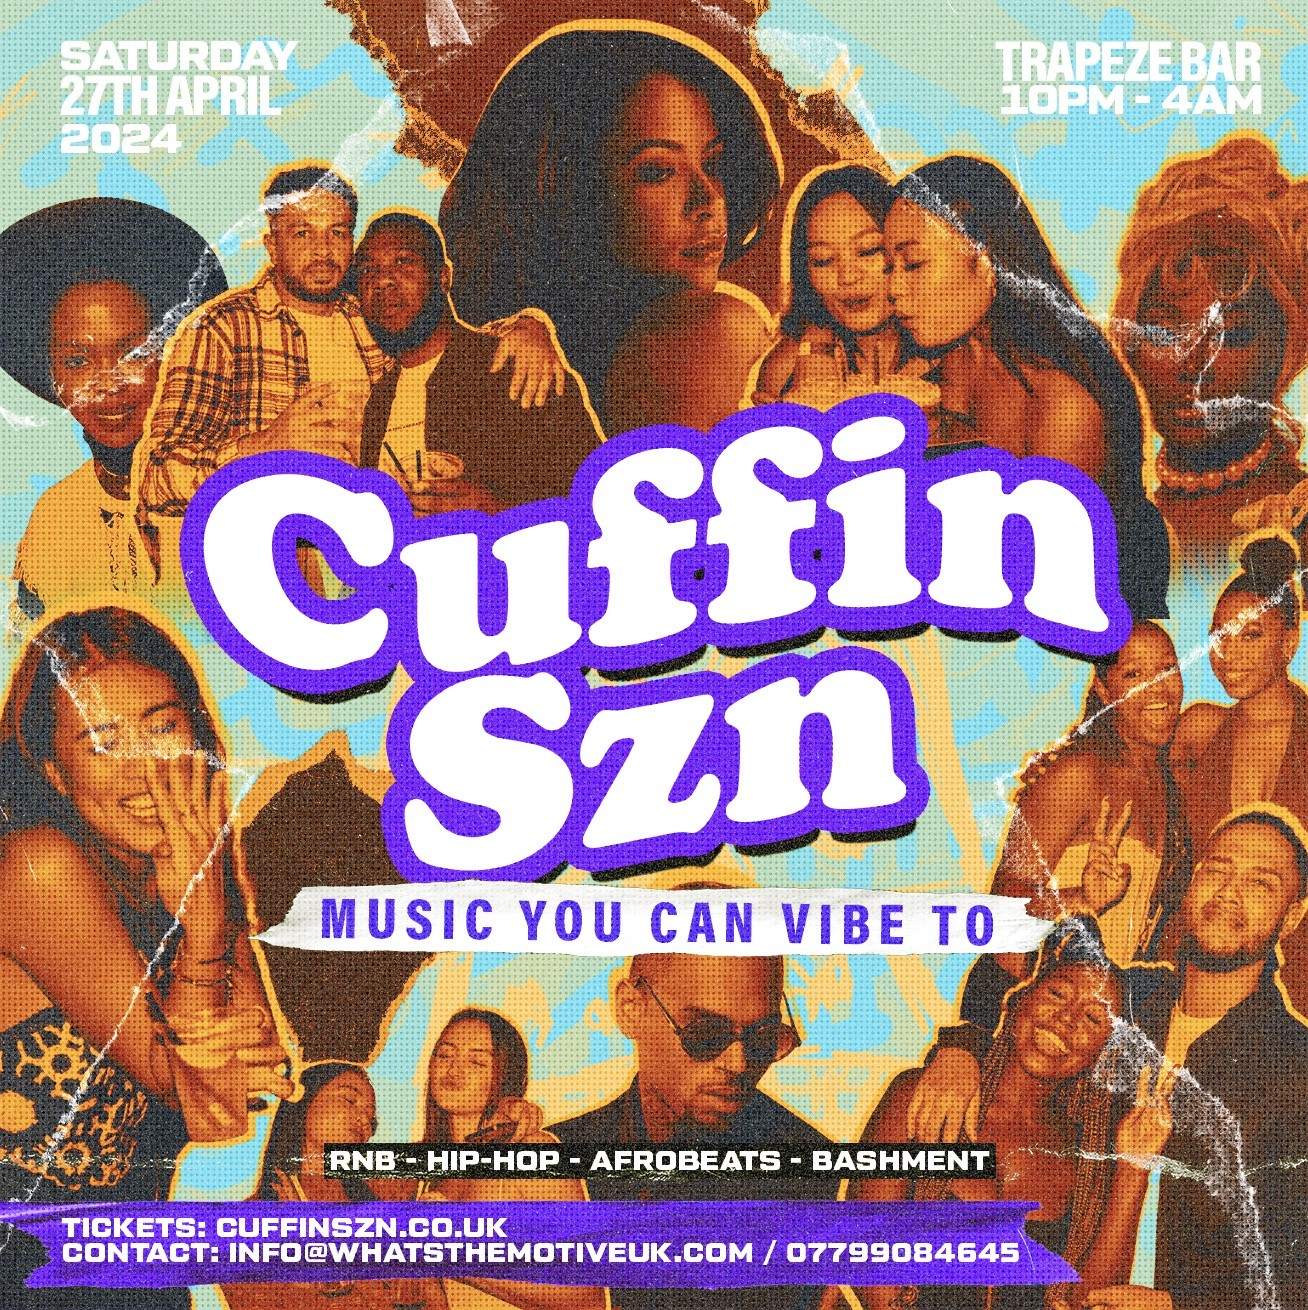 CUFFIN SZN - RnB, Hip-Hop, Afrobeats For U to Vibe to - Página frontal